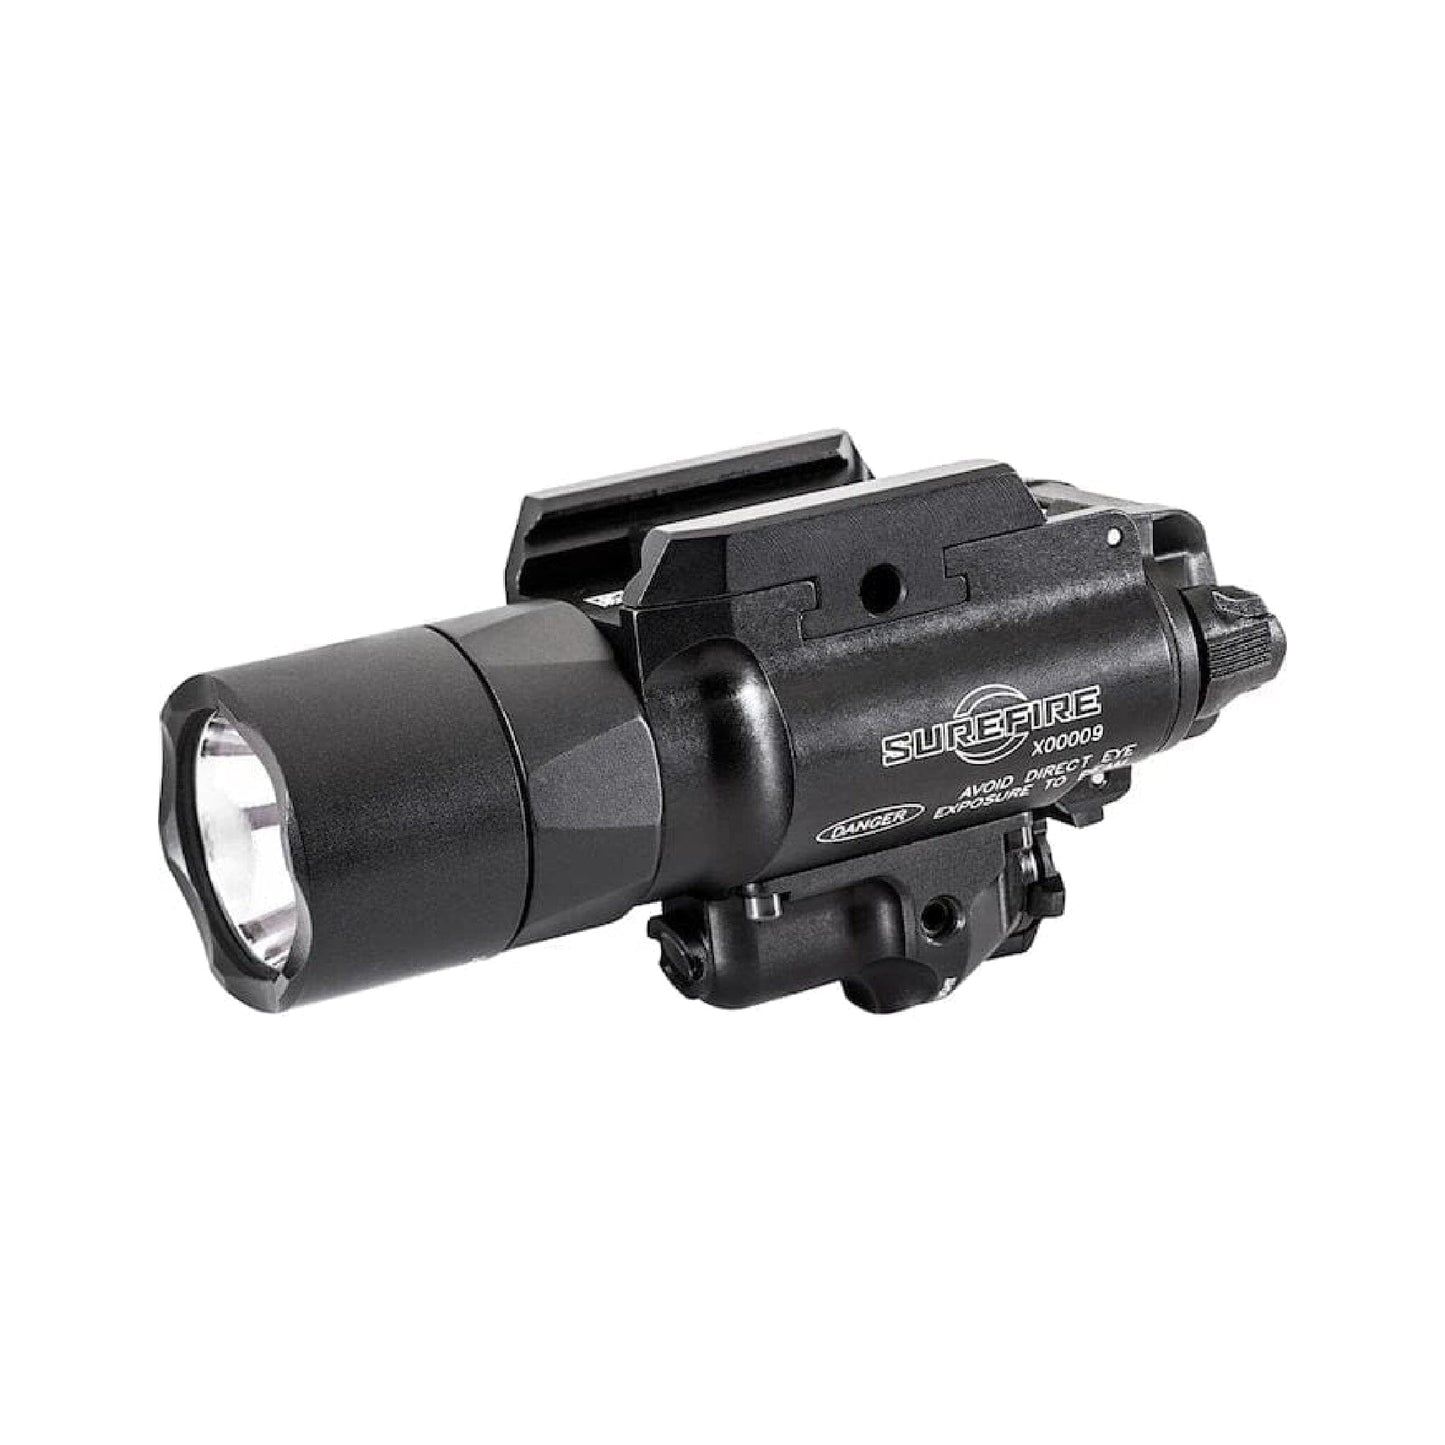 Surefire X400T-A-RD Turbo Weapon Light with Red Laser Weapon Light SureFire 